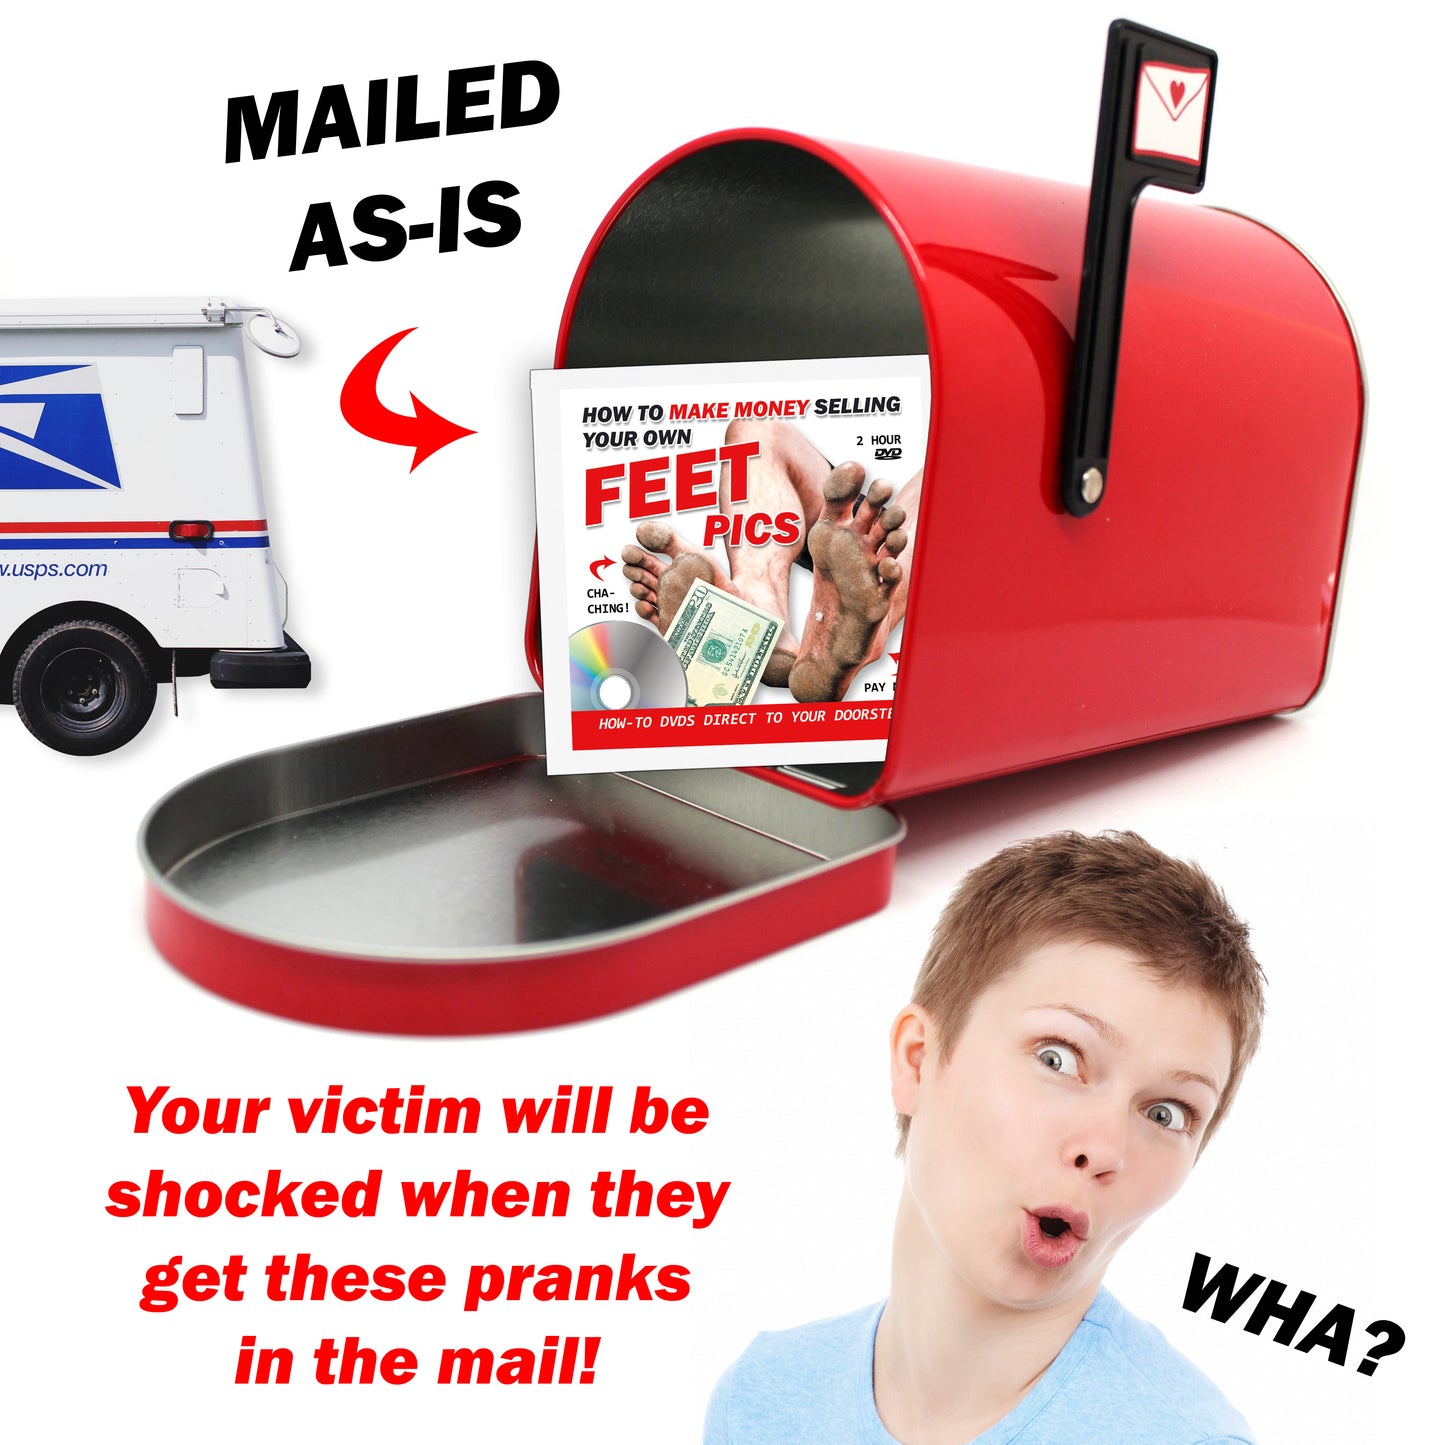 How To Make Money Selling Your Own Feet Pics Fake DVD mail prank gets sent directly to your victims 100% anonymously!